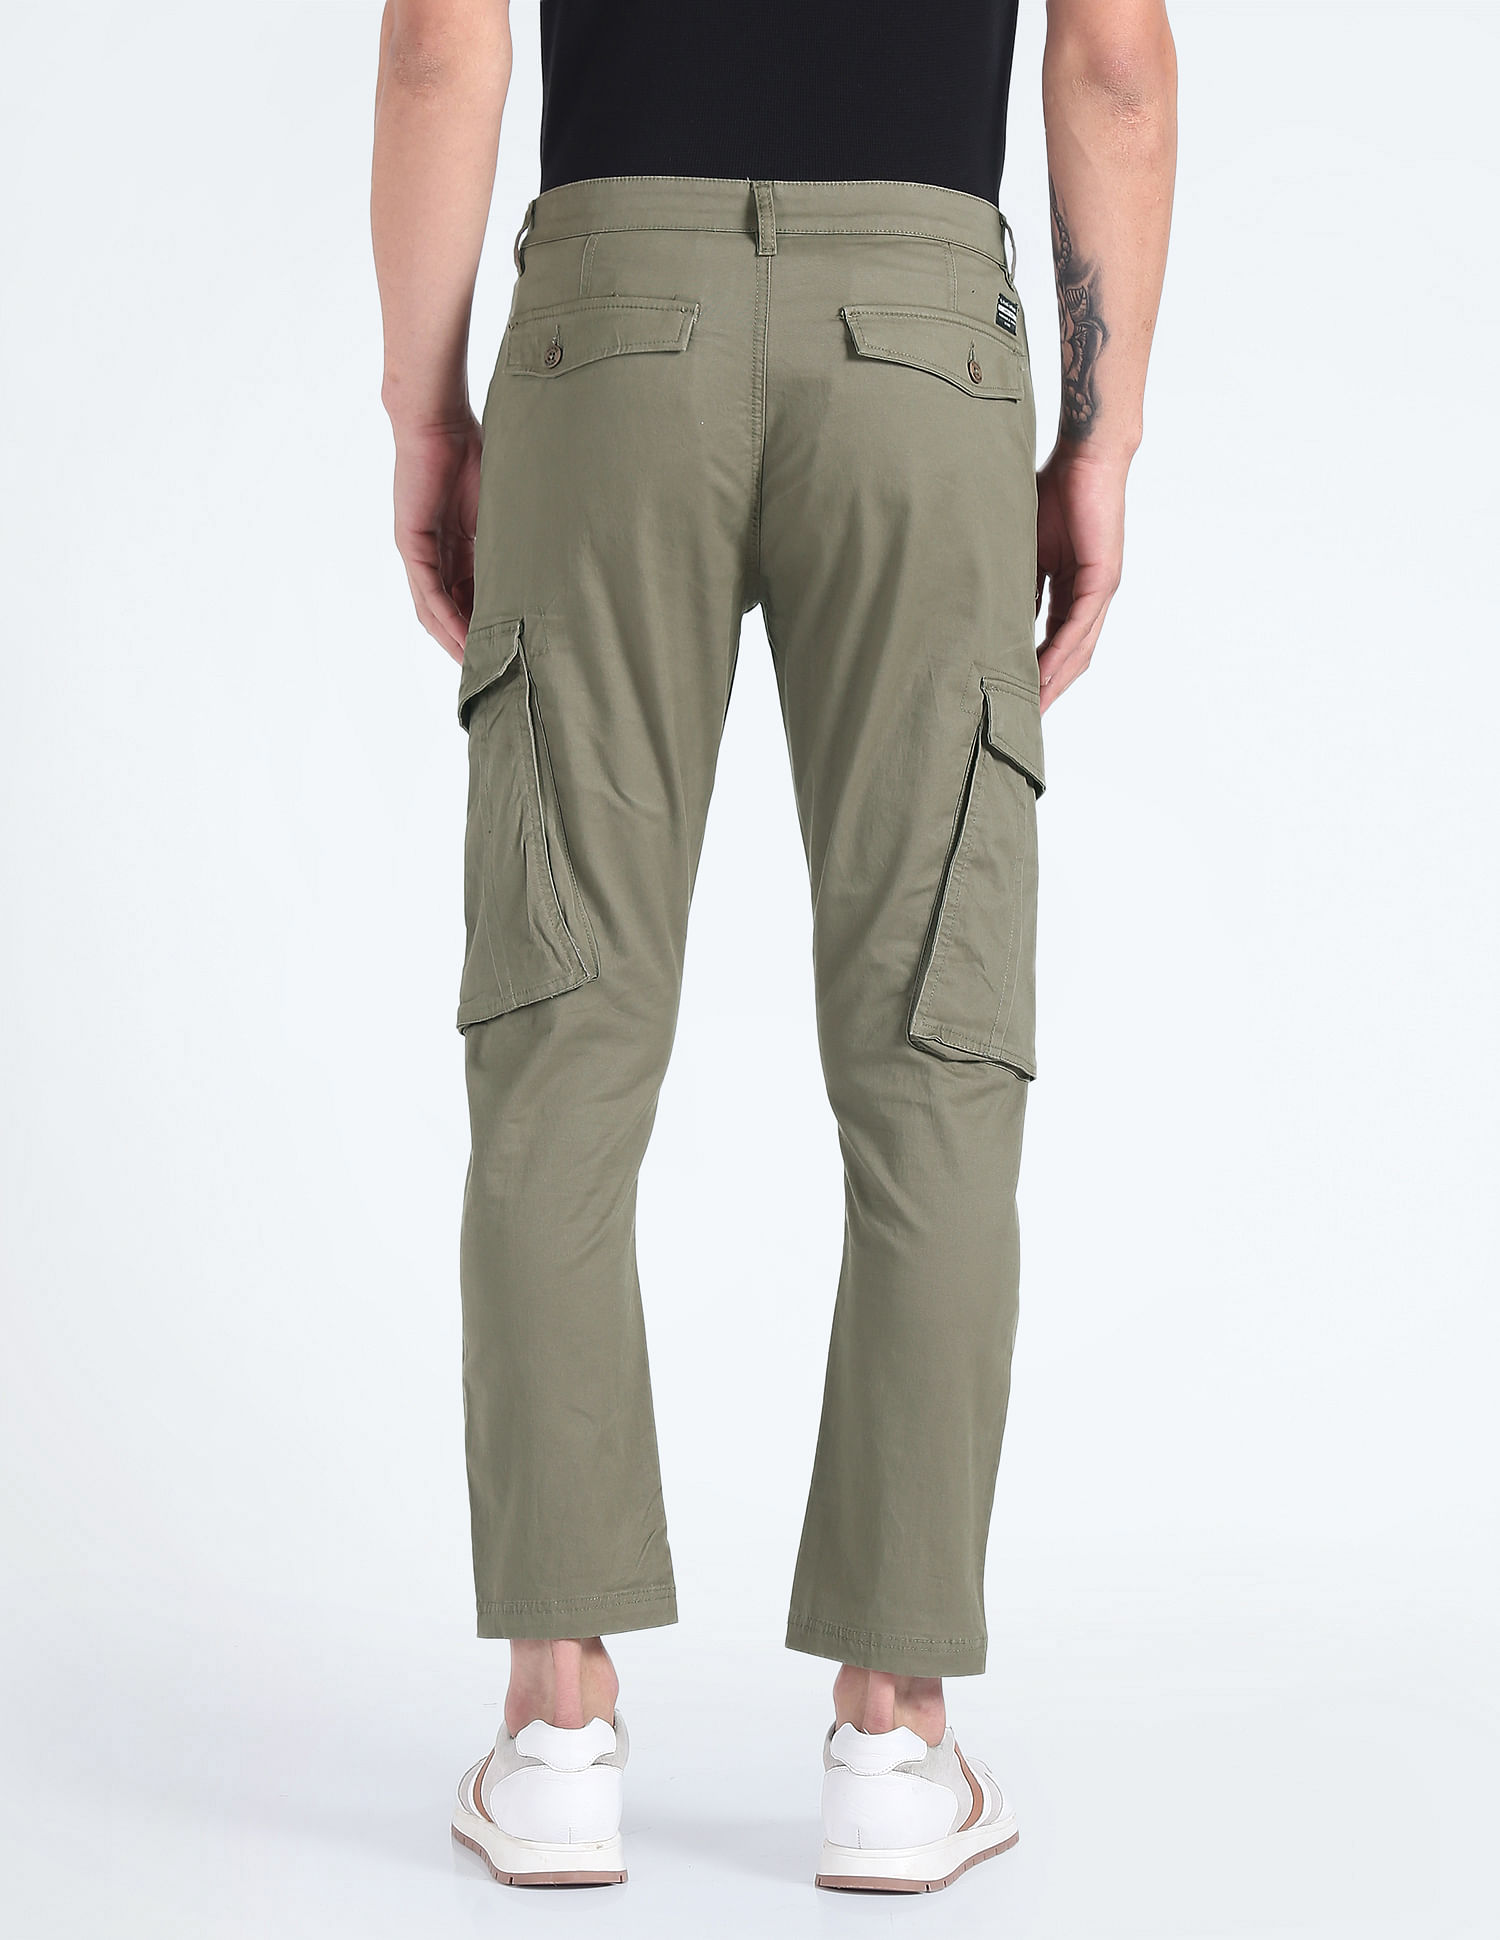 Buy FLYING MACHINE Mens 6 Pocket Slim Fit Solid Cargos | Shoppers Stop